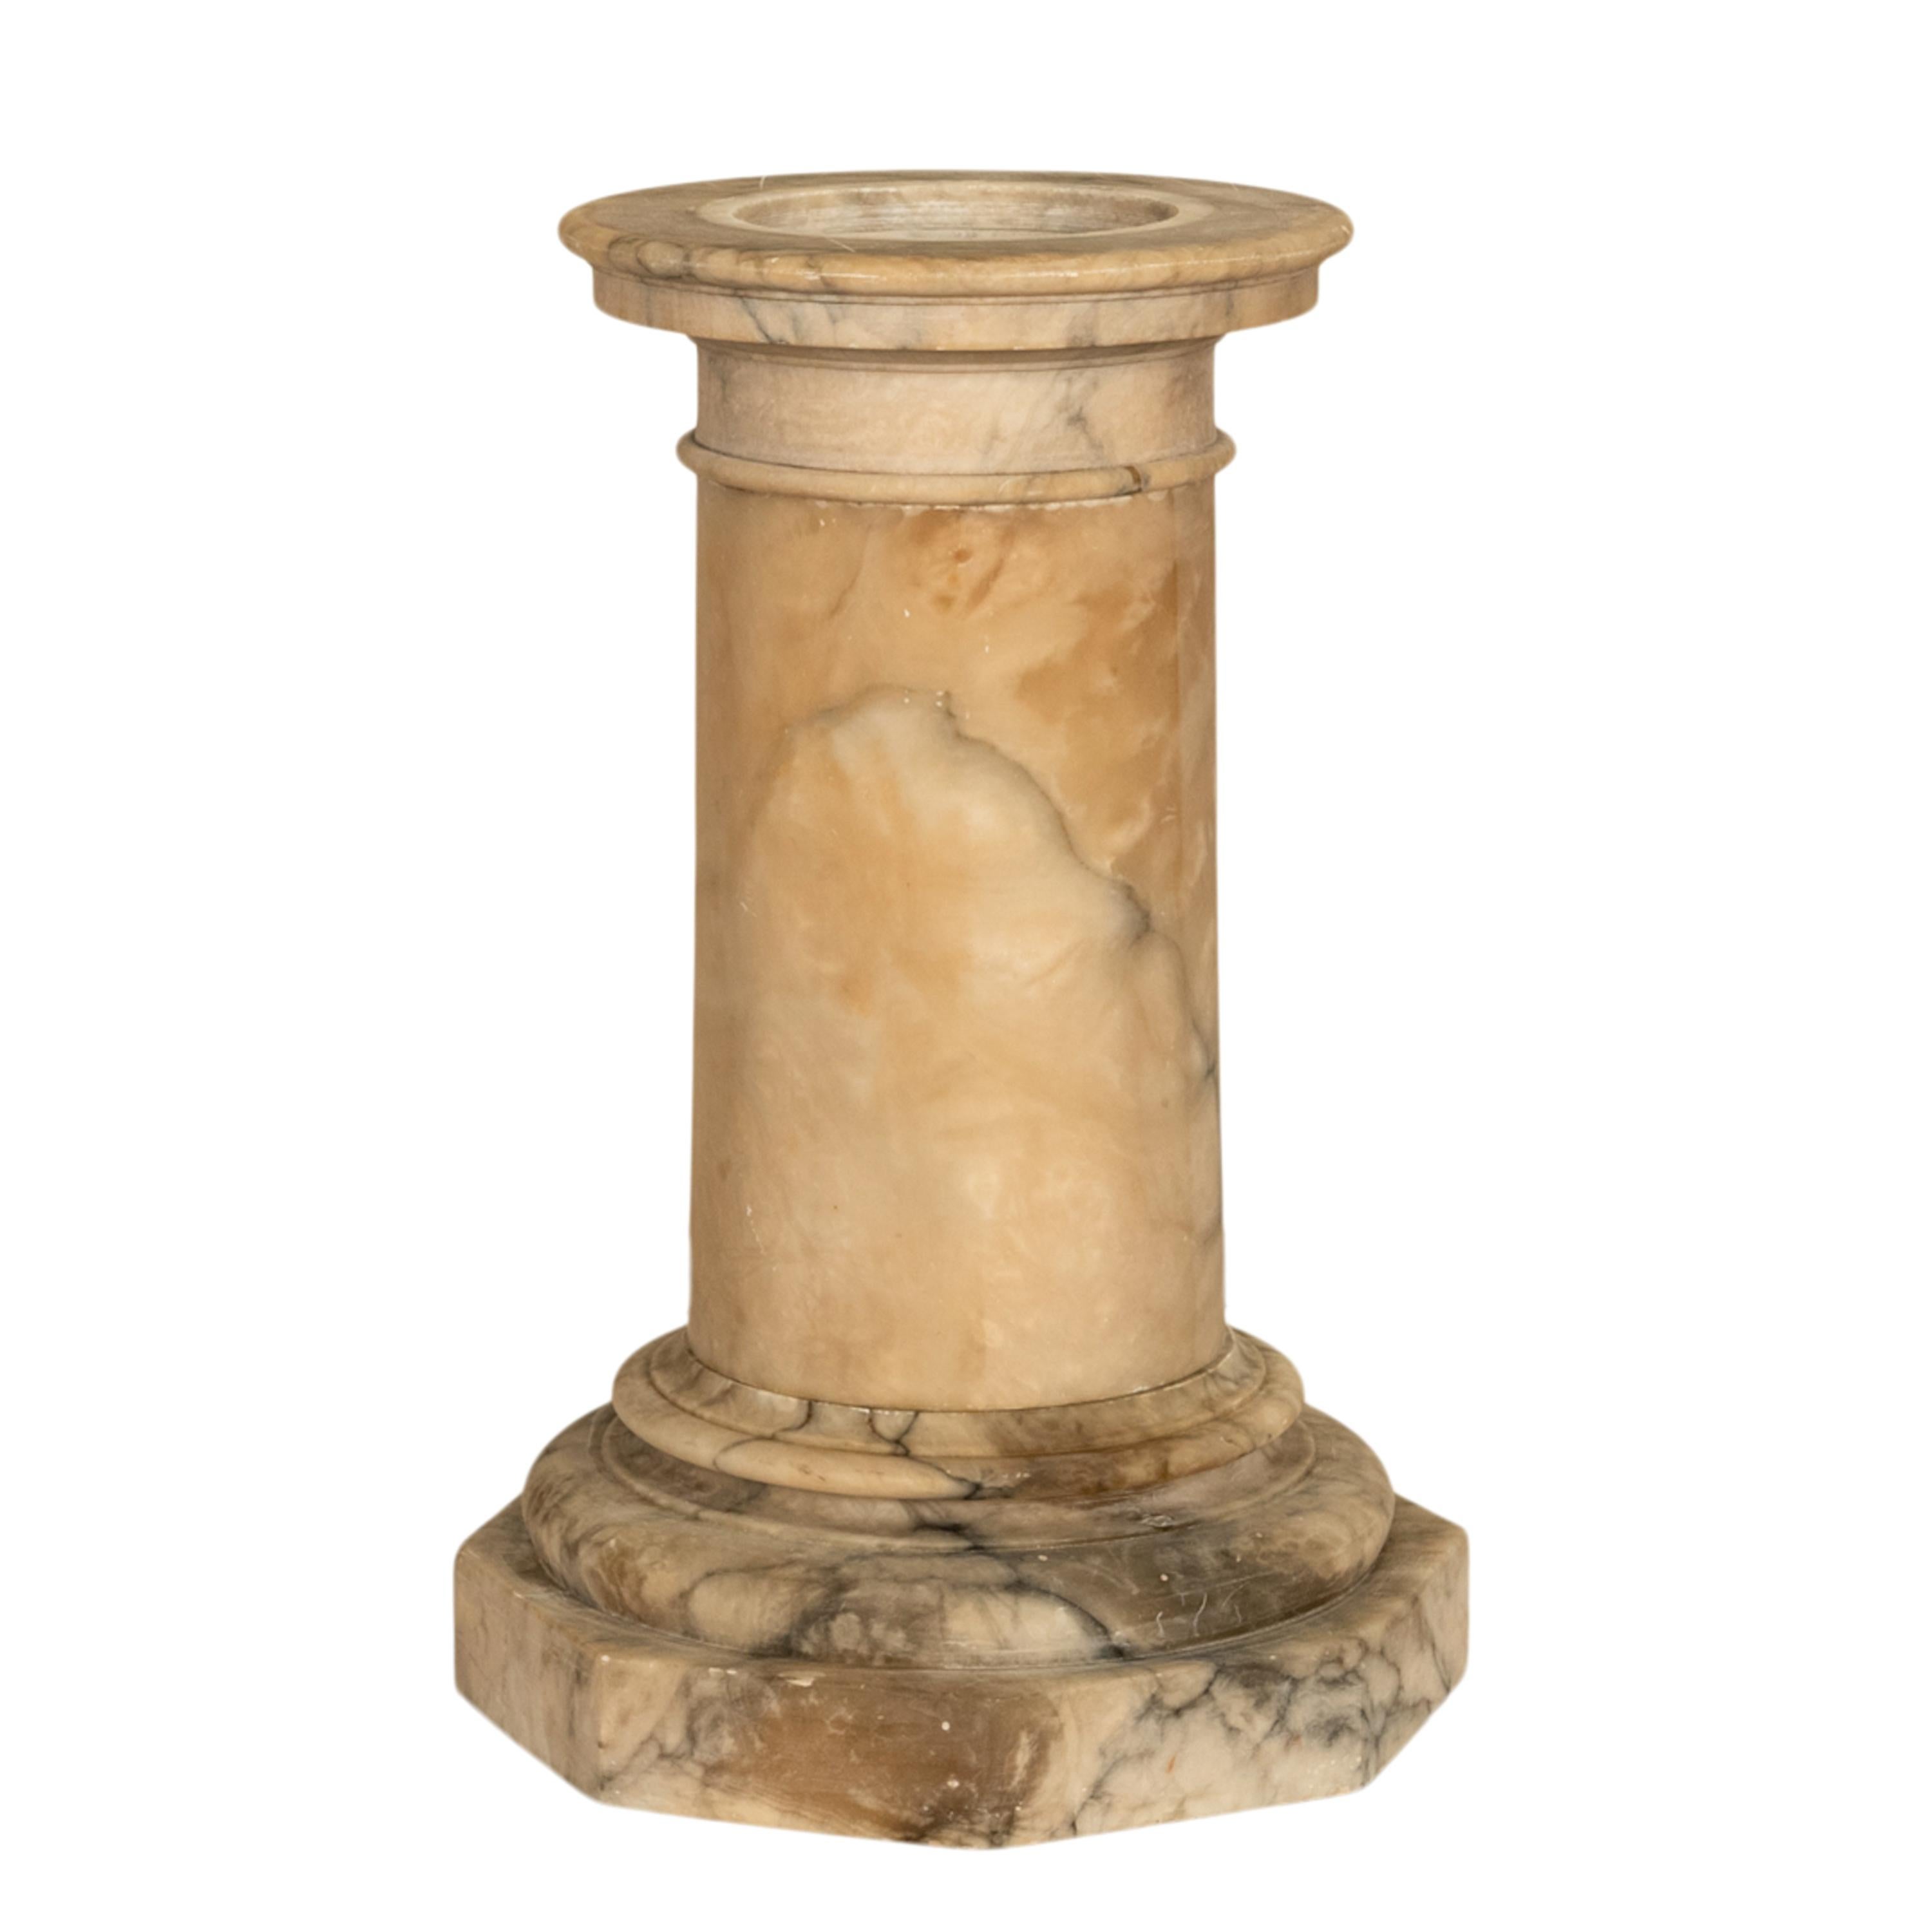 Antique 19th Century Italian Carved Alabaster Neoclassical Urn on Pedestal 1850 For Sale 9